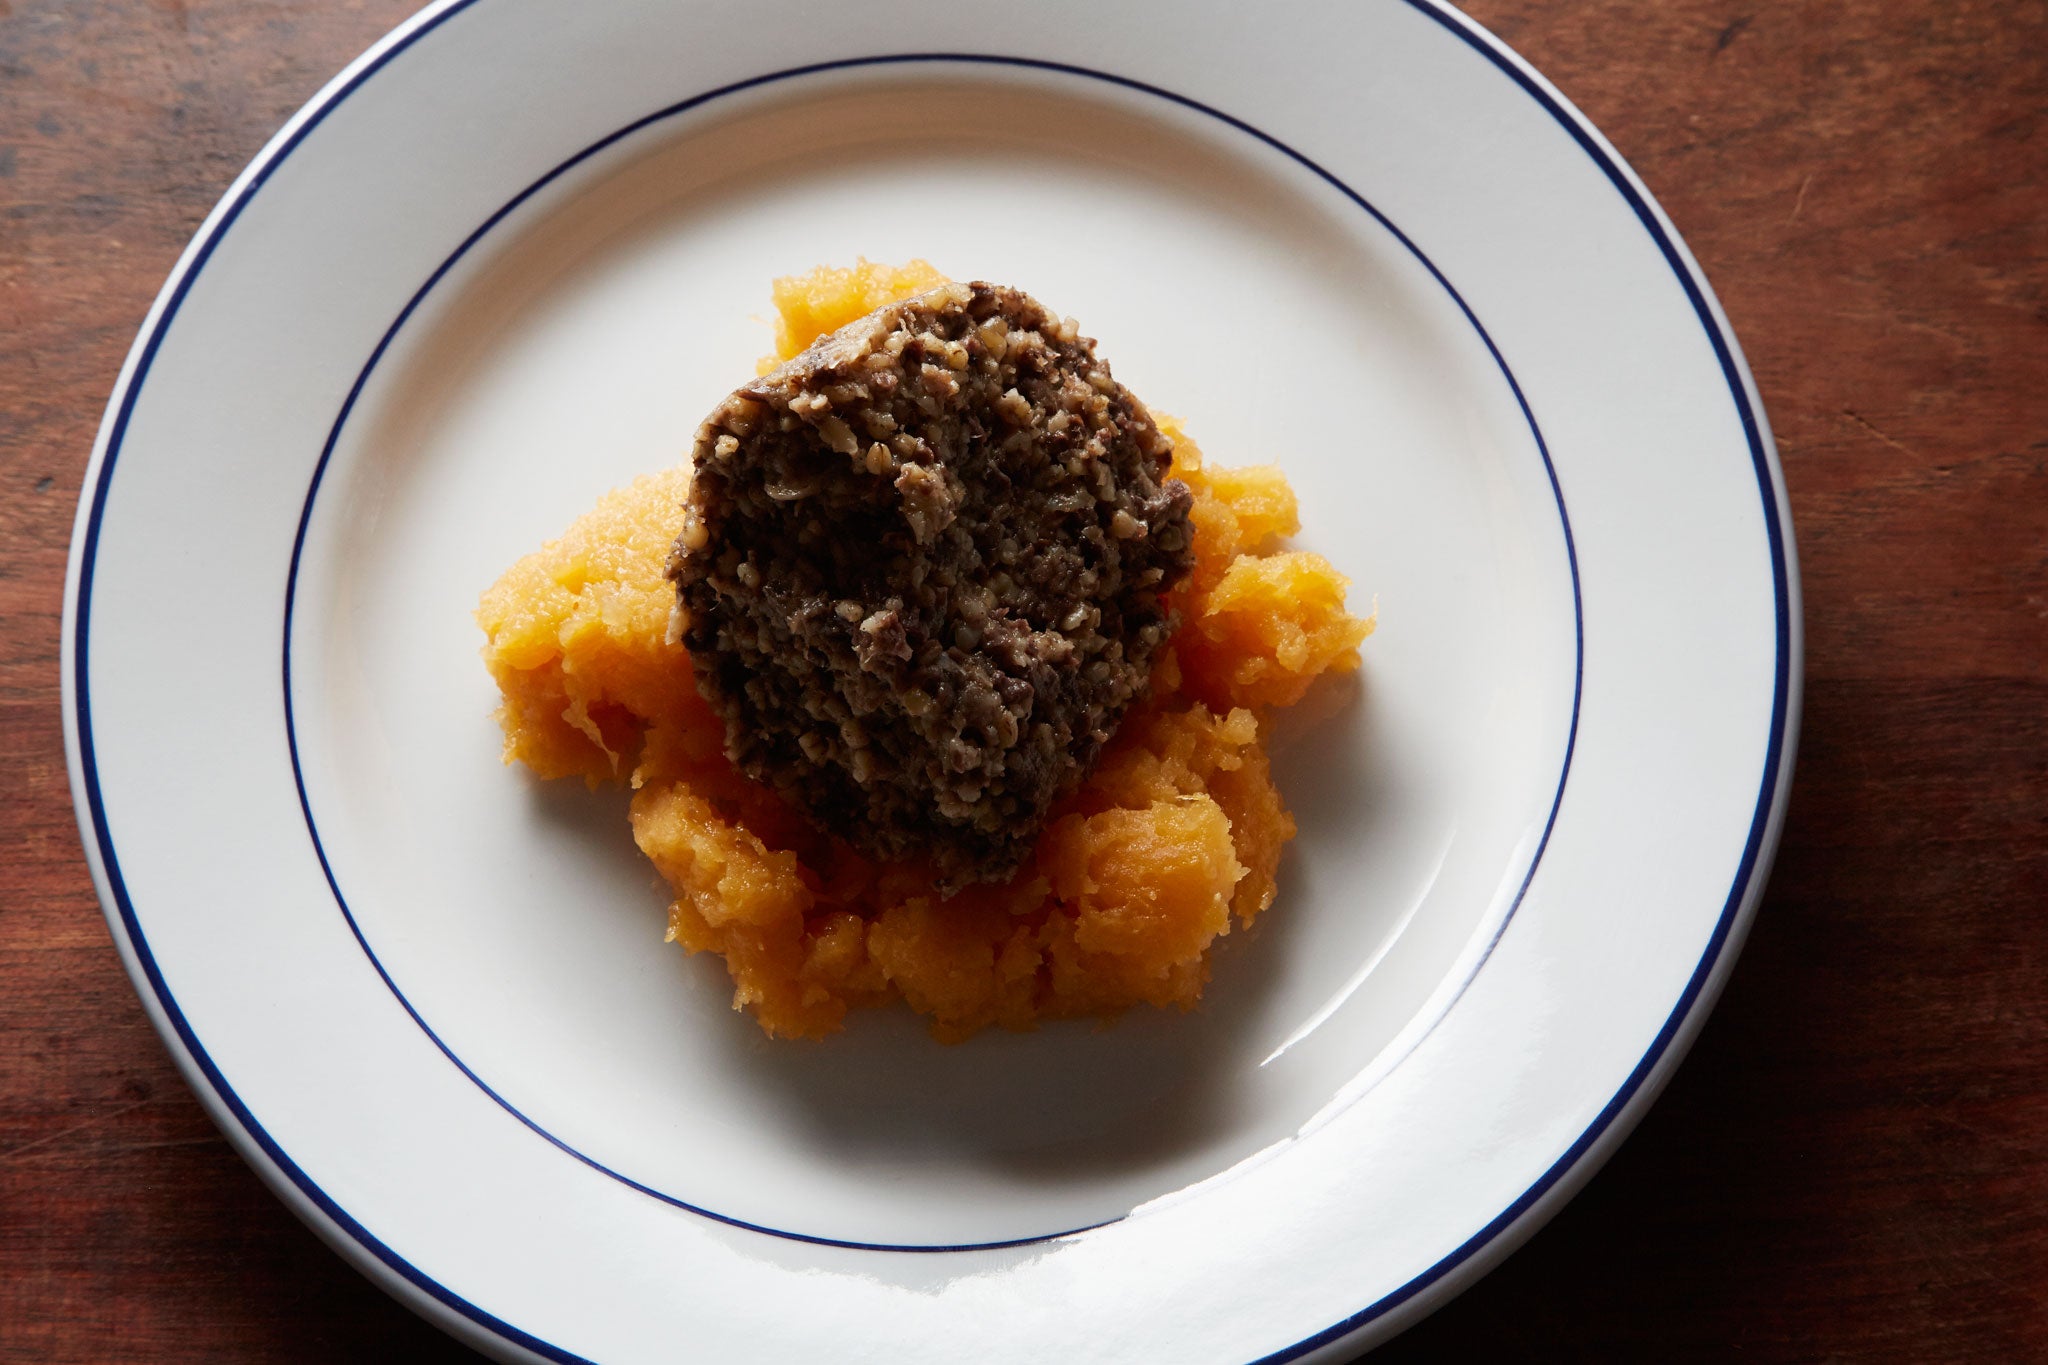 It wouldn't be Burns Night without haggis and bashed neeps